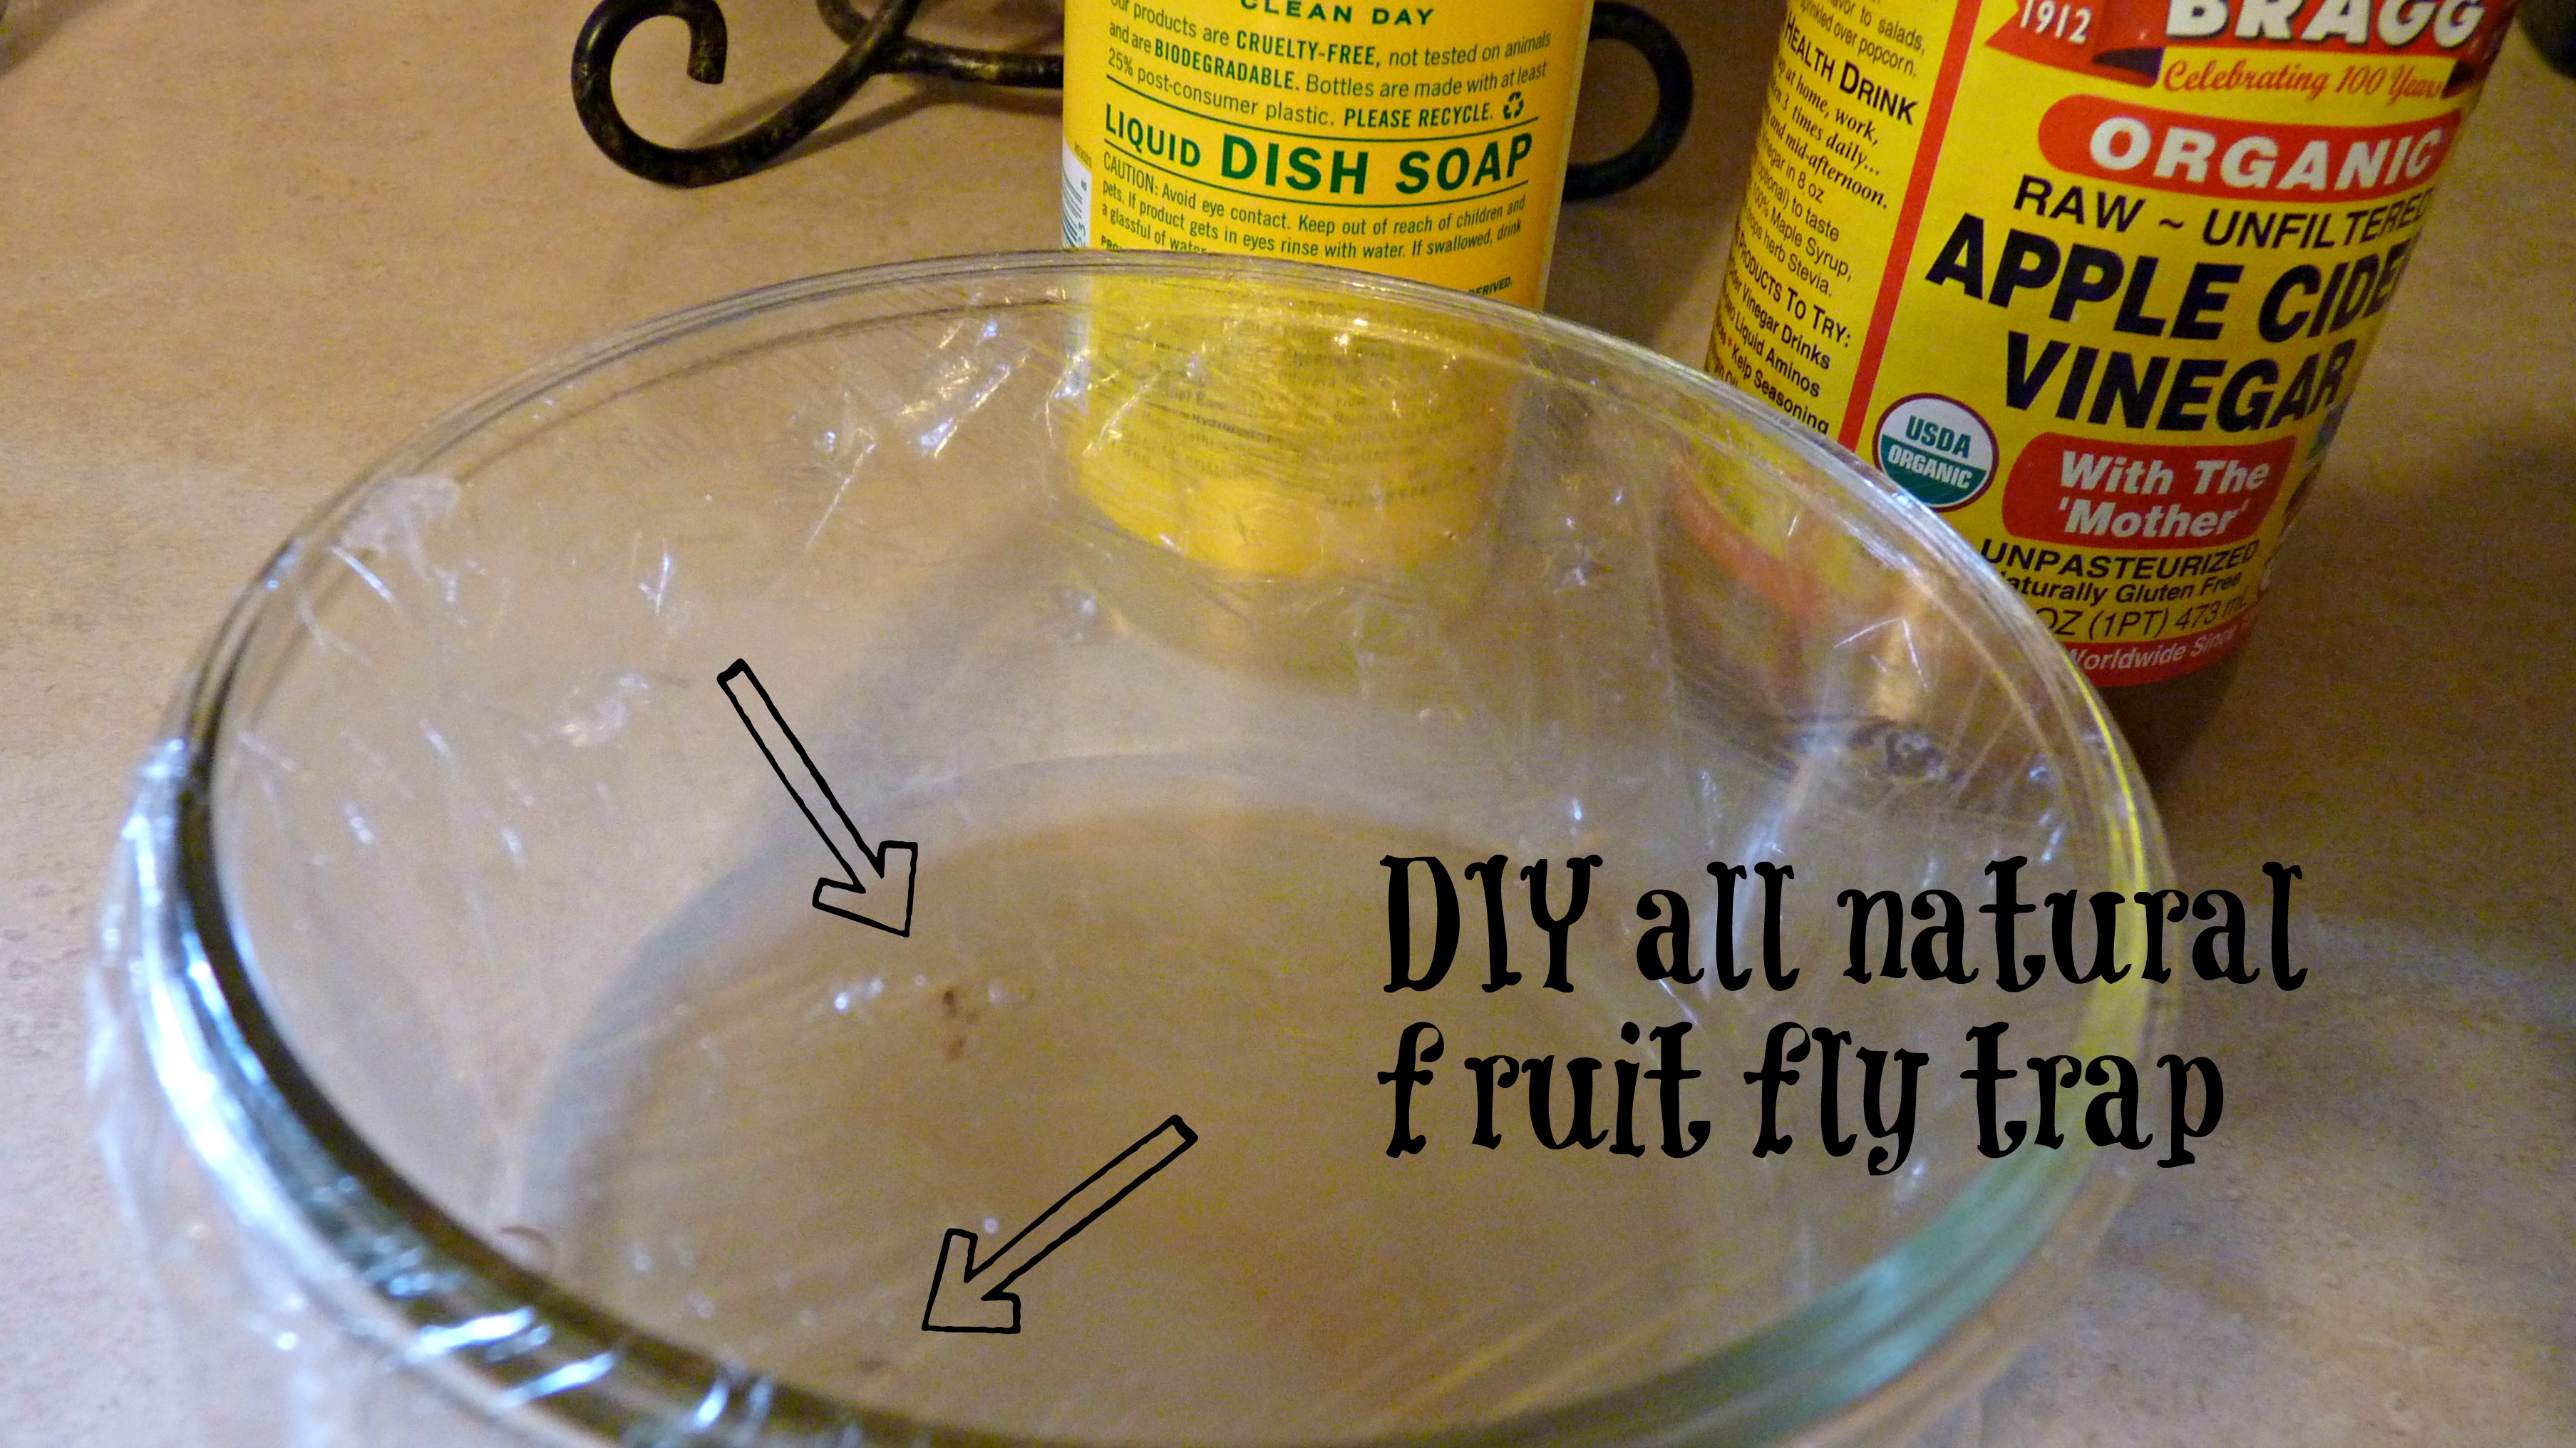 How to Trap and Get Rid of Fruit Flies